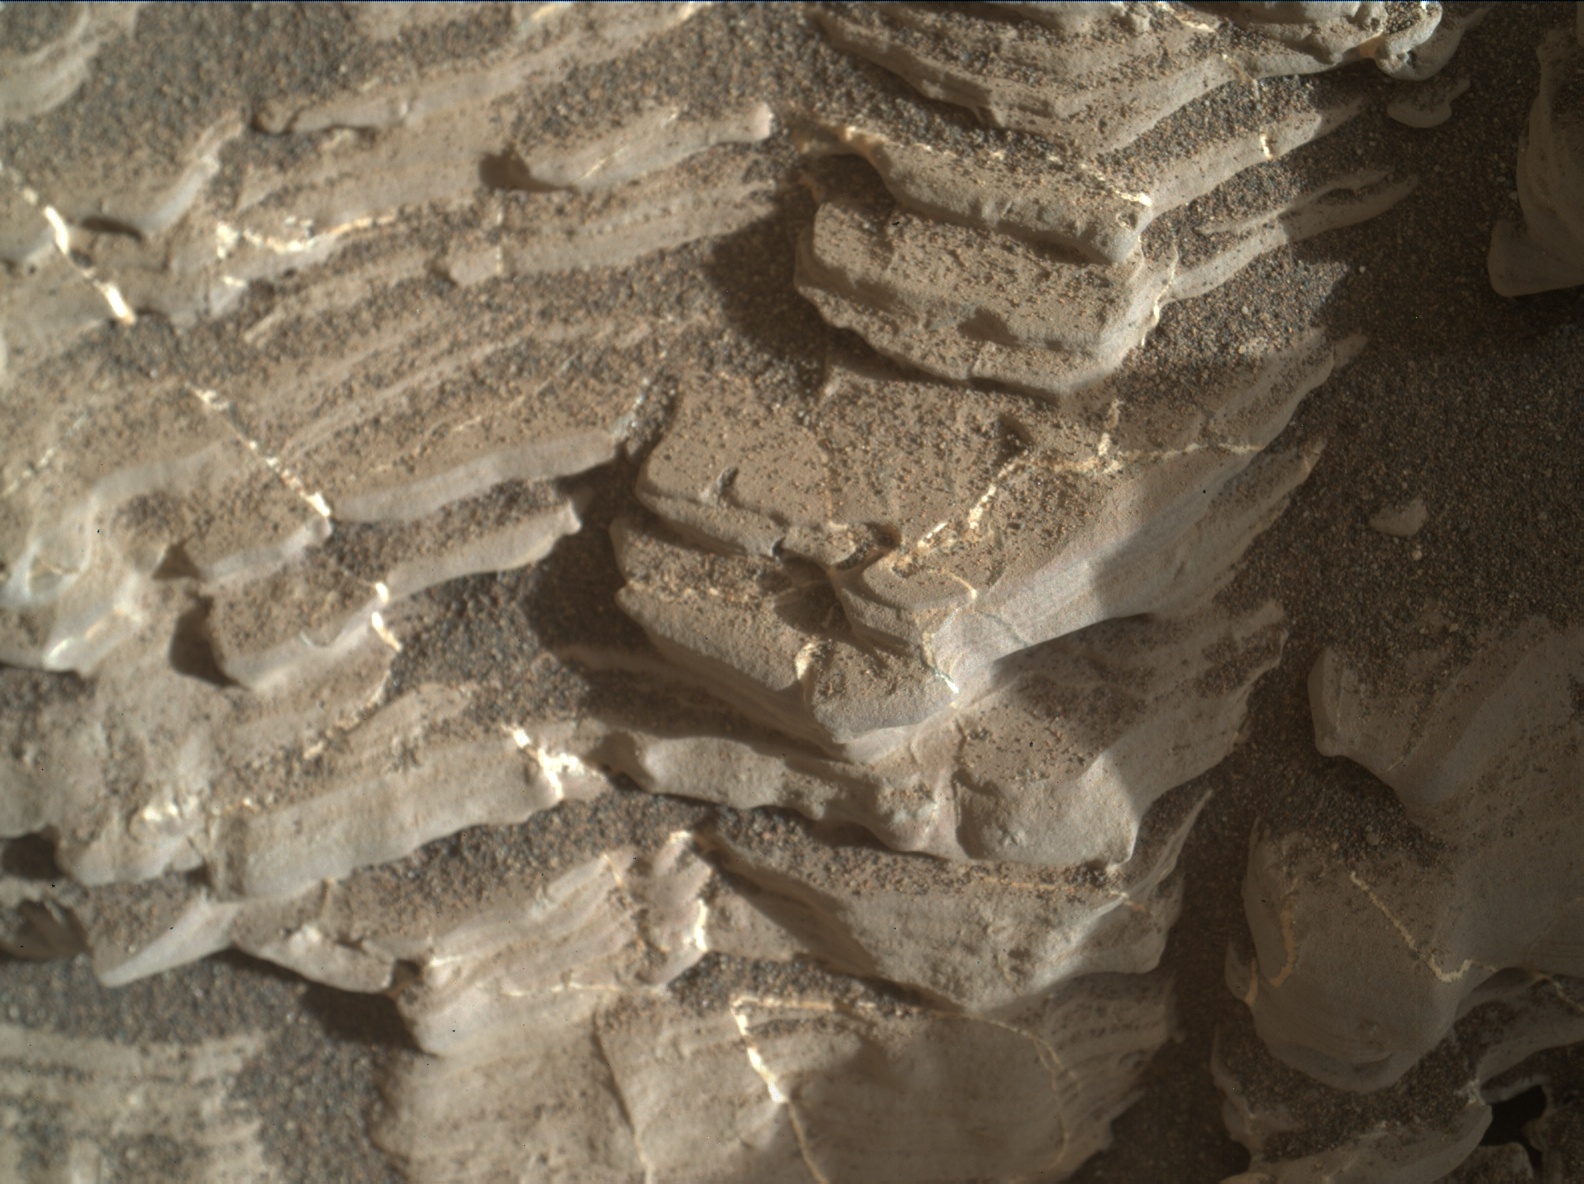 Nasa's Mars rover Curiosity acquired this image using its Mars Hand Lens Imager (MAHLI) on Sol 1925